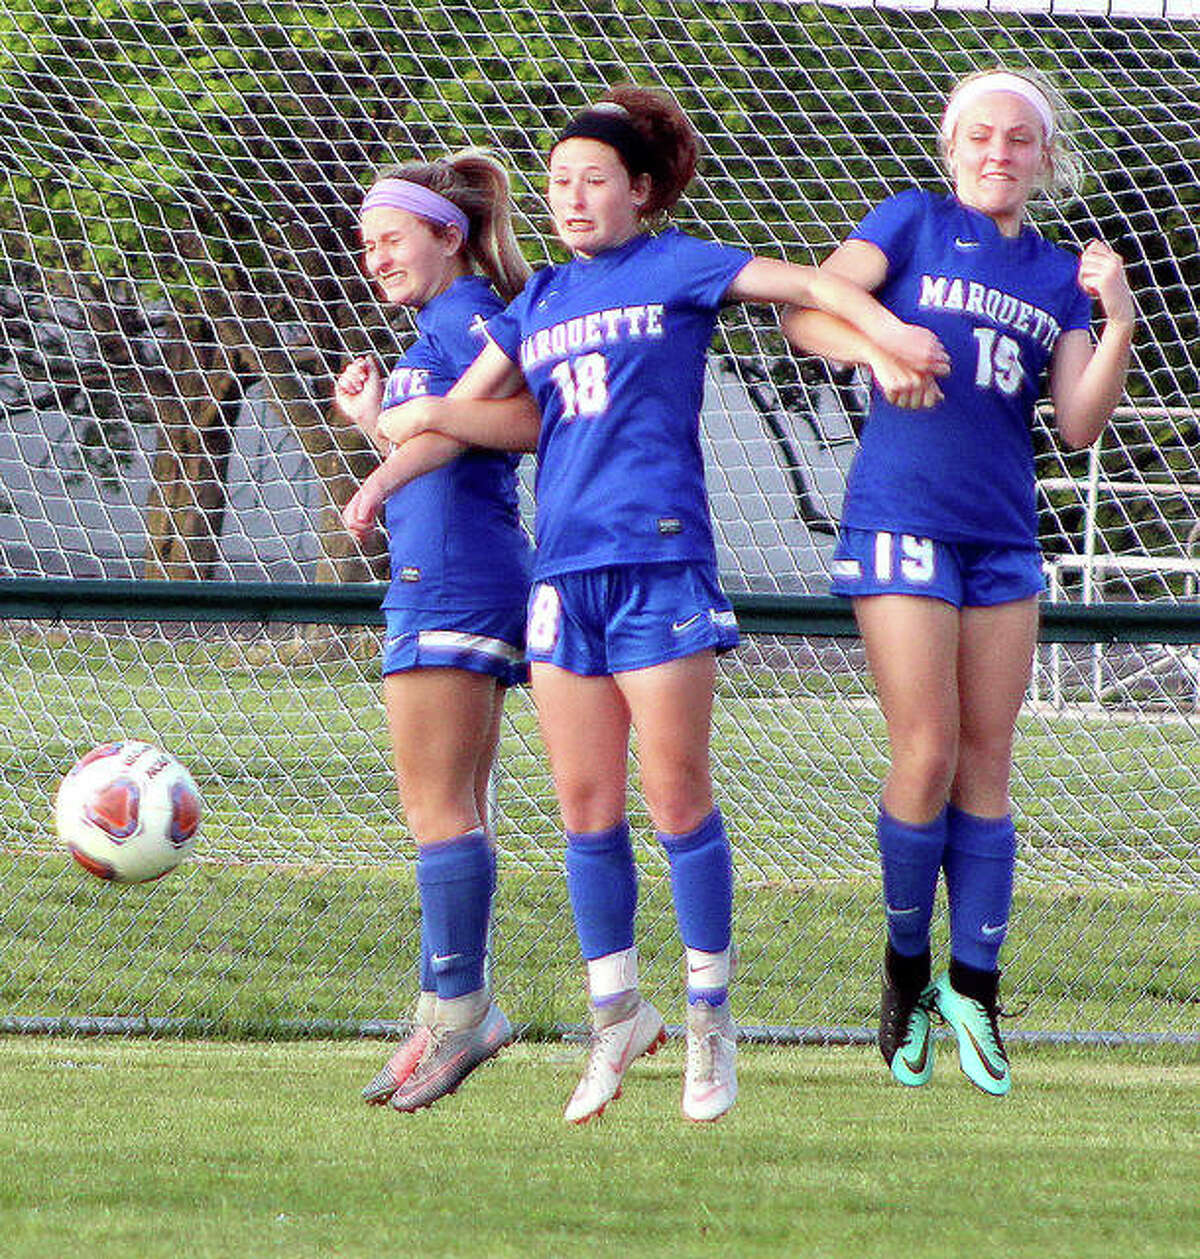 From left, Marquette’s Lydia Randazzo, Madelyn Smith and Amma Anselm leap with arms locked together as they form a defensive wall during a Belleville East free kick late in Monday’s 3-1 Marquette victory at Gordon Moore Park.